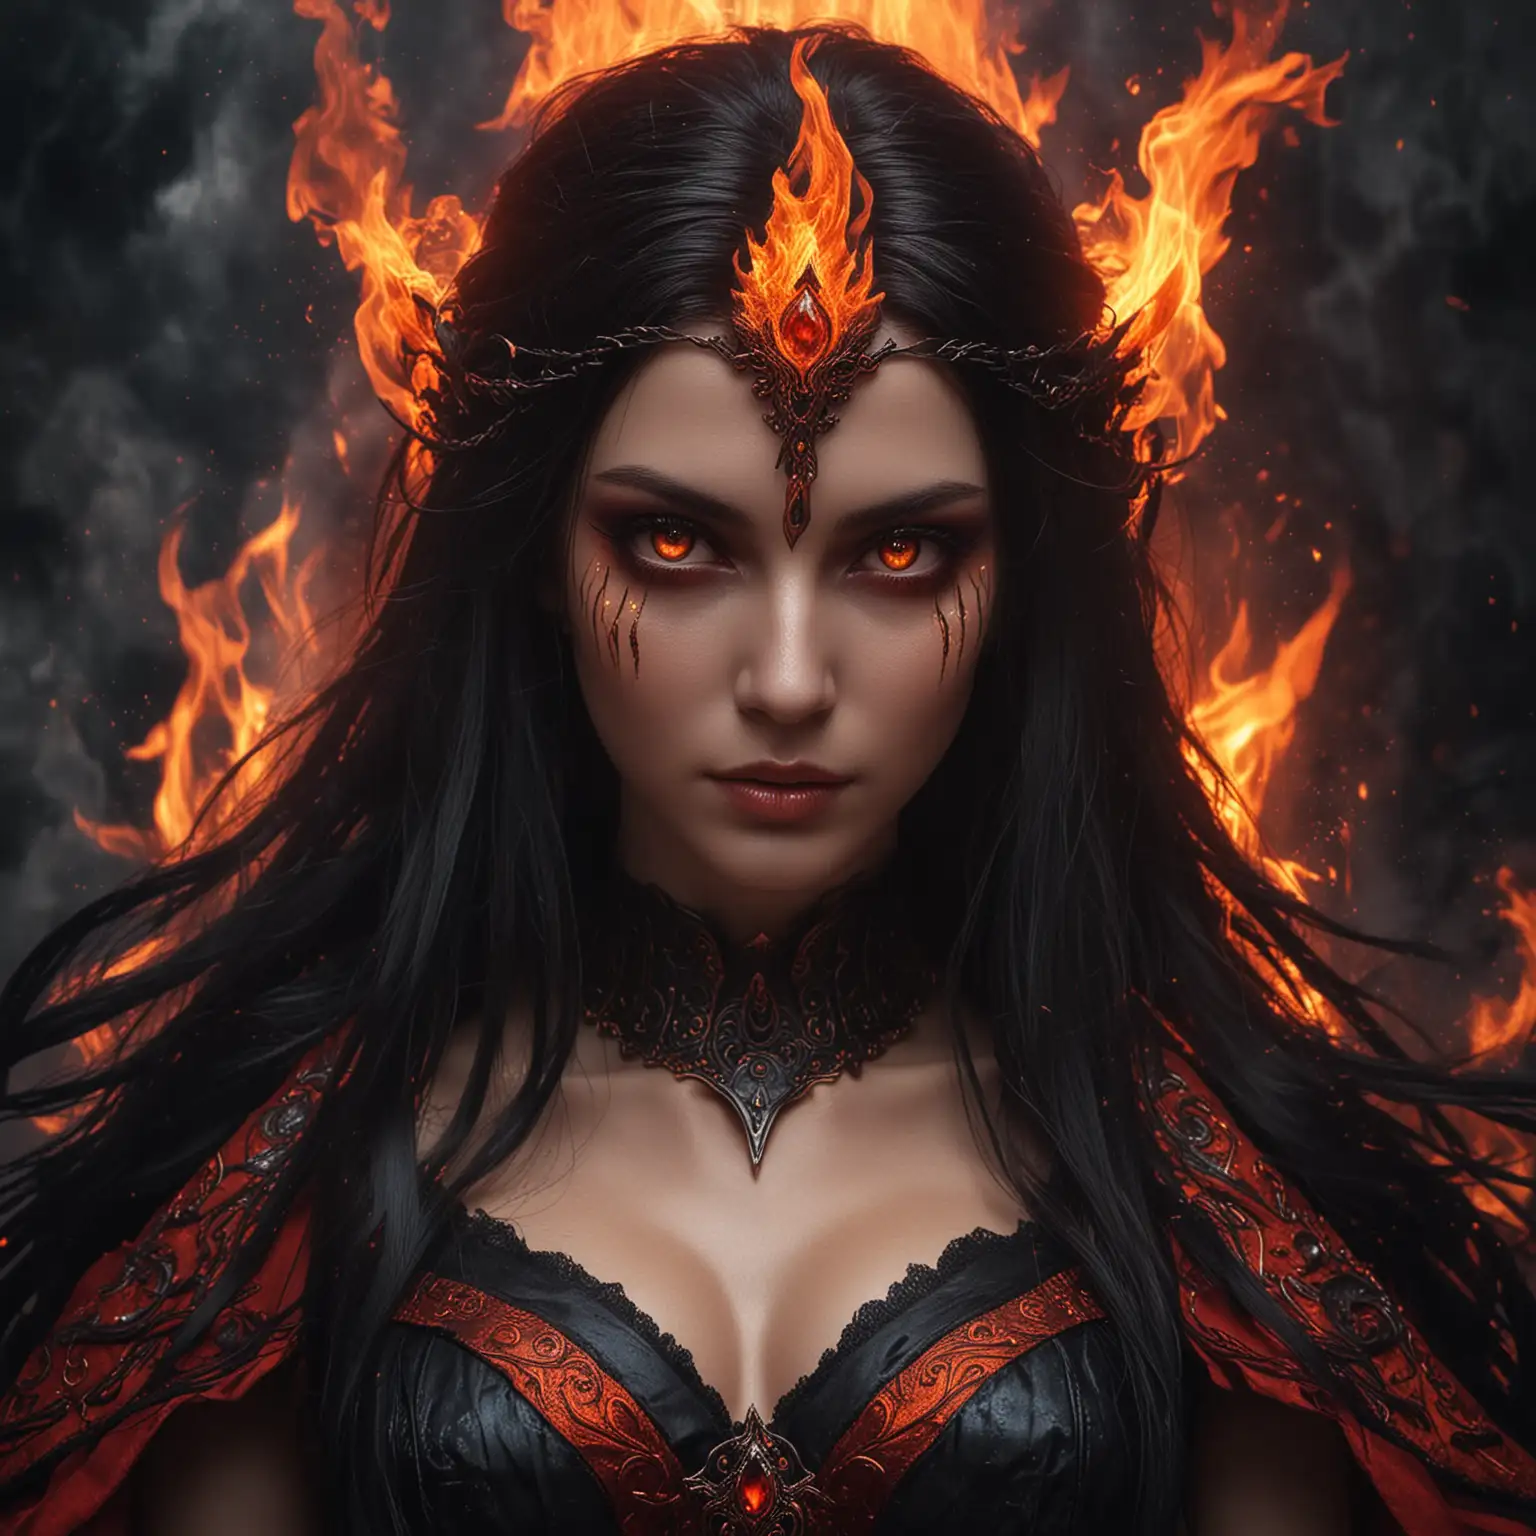 goddess of fire, fantasy, black and orange eyes, beautiful, sexy, dark, evil, black and red clothing.